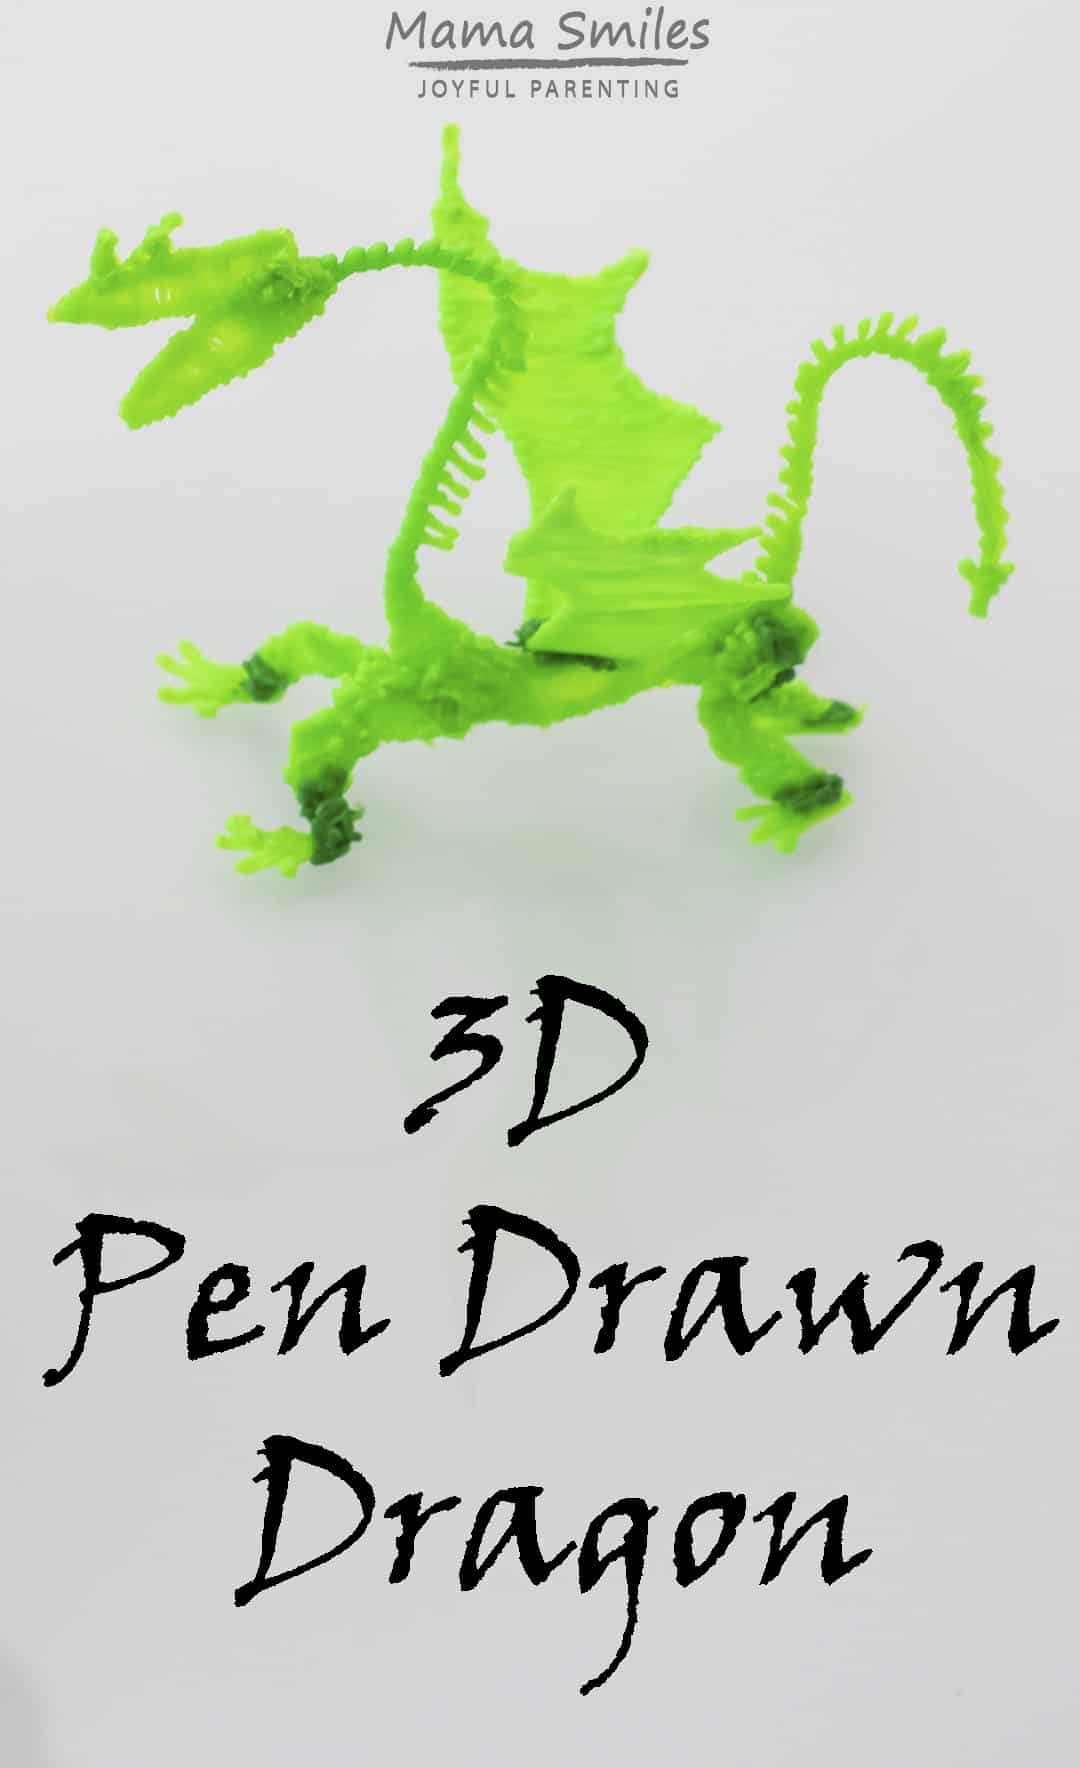 3D pen drawn dragon - made using the 3Doodler Create+. #3Dprinting #3doodler #whatwillyoucreate